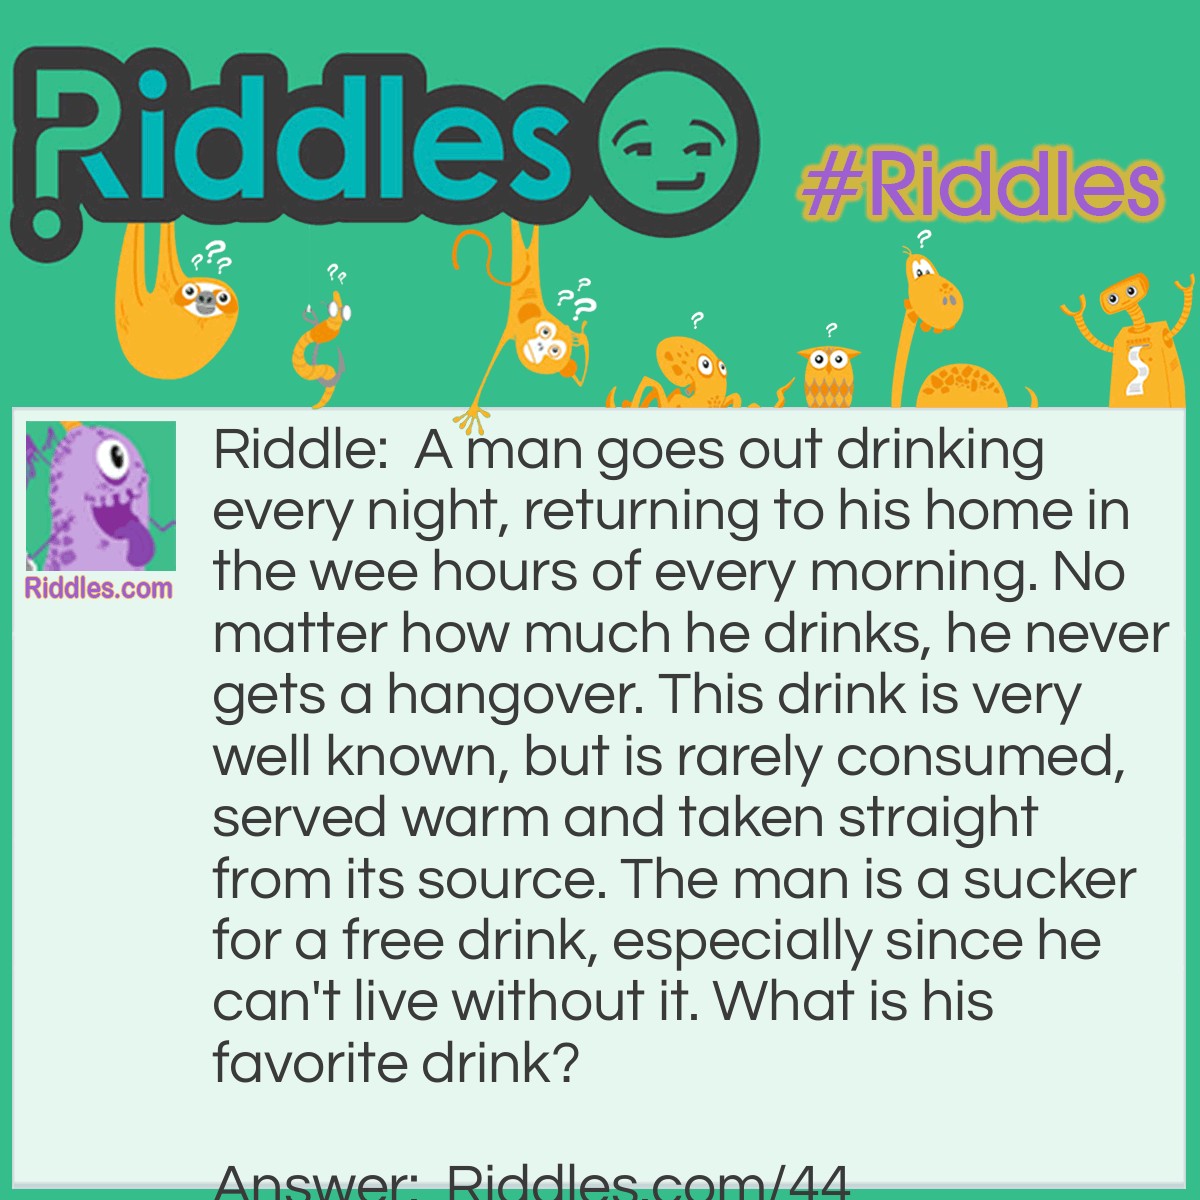 Riddle: A man goes out drinking every night, returning to his home in the wee hours of every morning. No matter how much he drinks, he never gets a hangover. This drink is very well known, but is rarely consumed, served warm and taken straight from its source. The man is a sucker for a free drink, especially since he can't live without it. What is his favorite drink? Answer: Blood, he's a vampire!